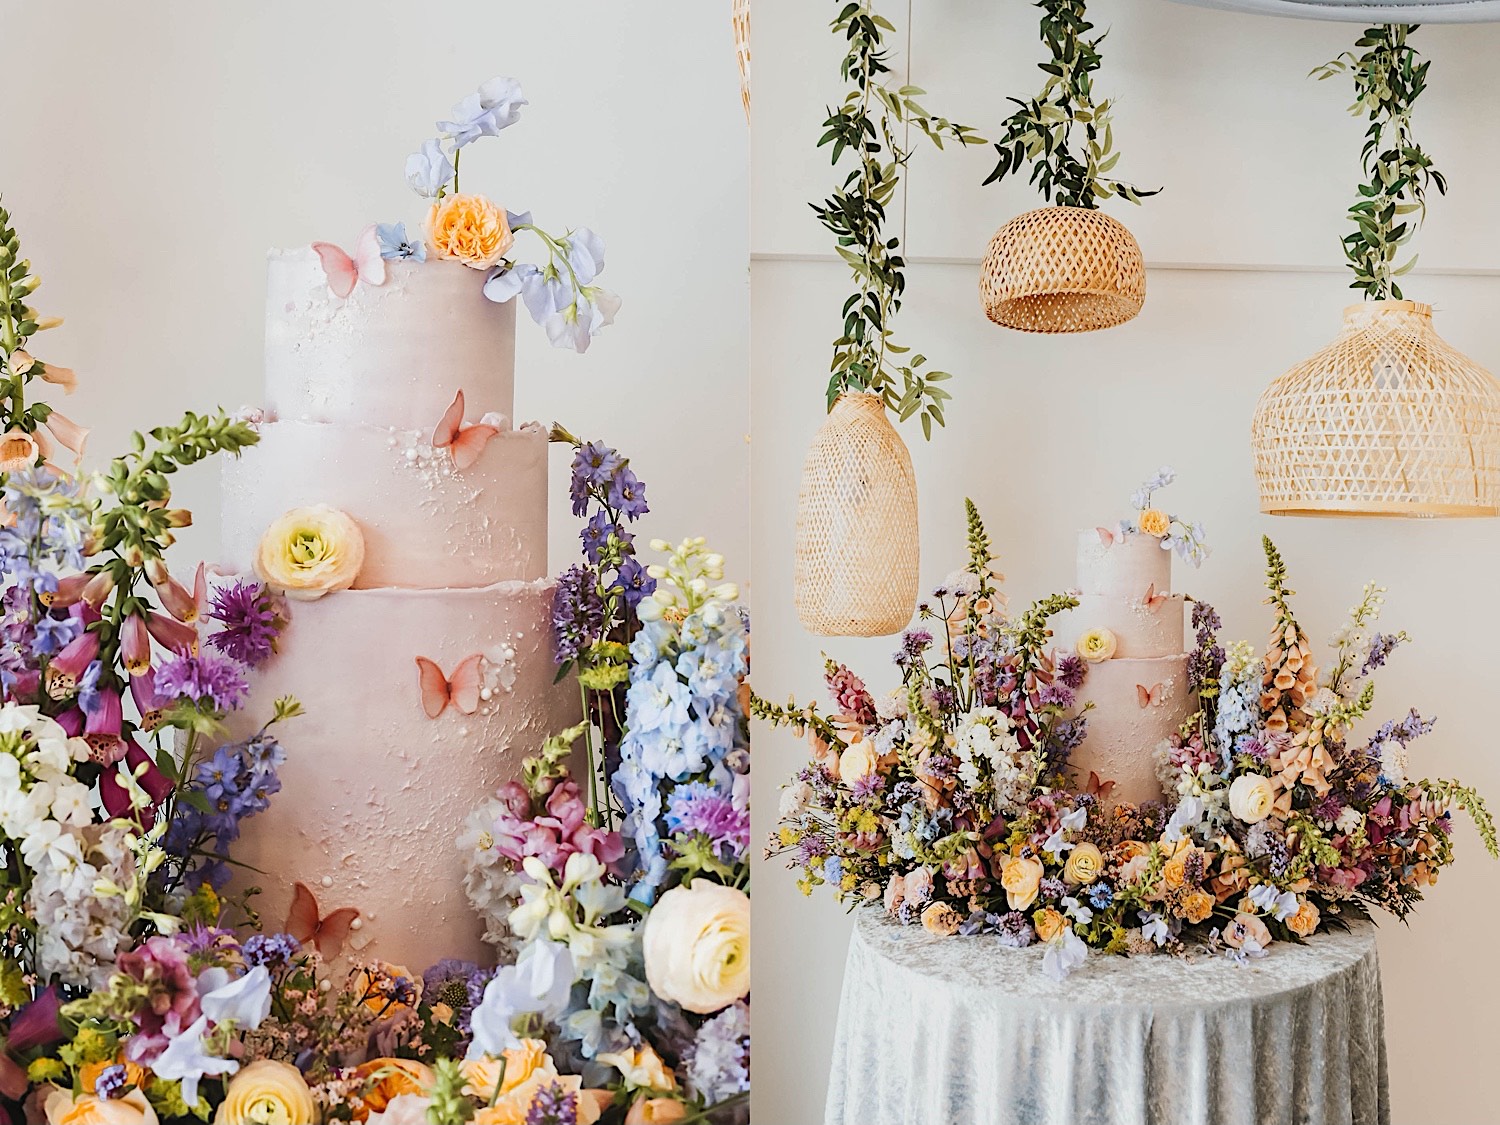 2 photos side by side of a wedding cake surrounded by flowers, the left photo is a close up